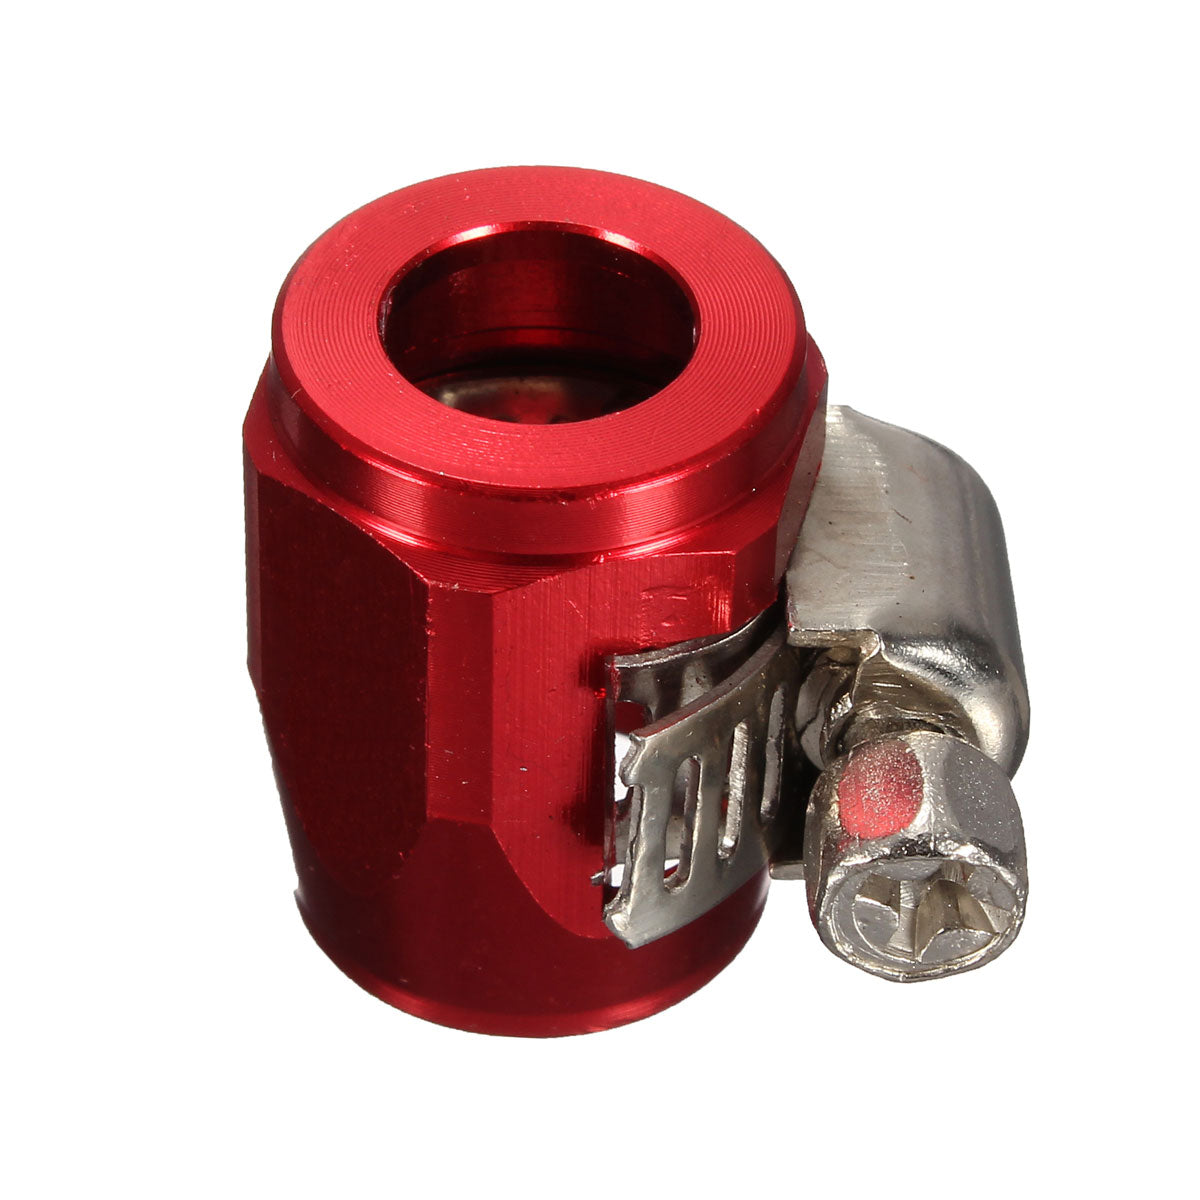 AN4 Hose End Finisher Fuel Oil Water Pipe Jubilee Clip Clamp - Auto GoShop